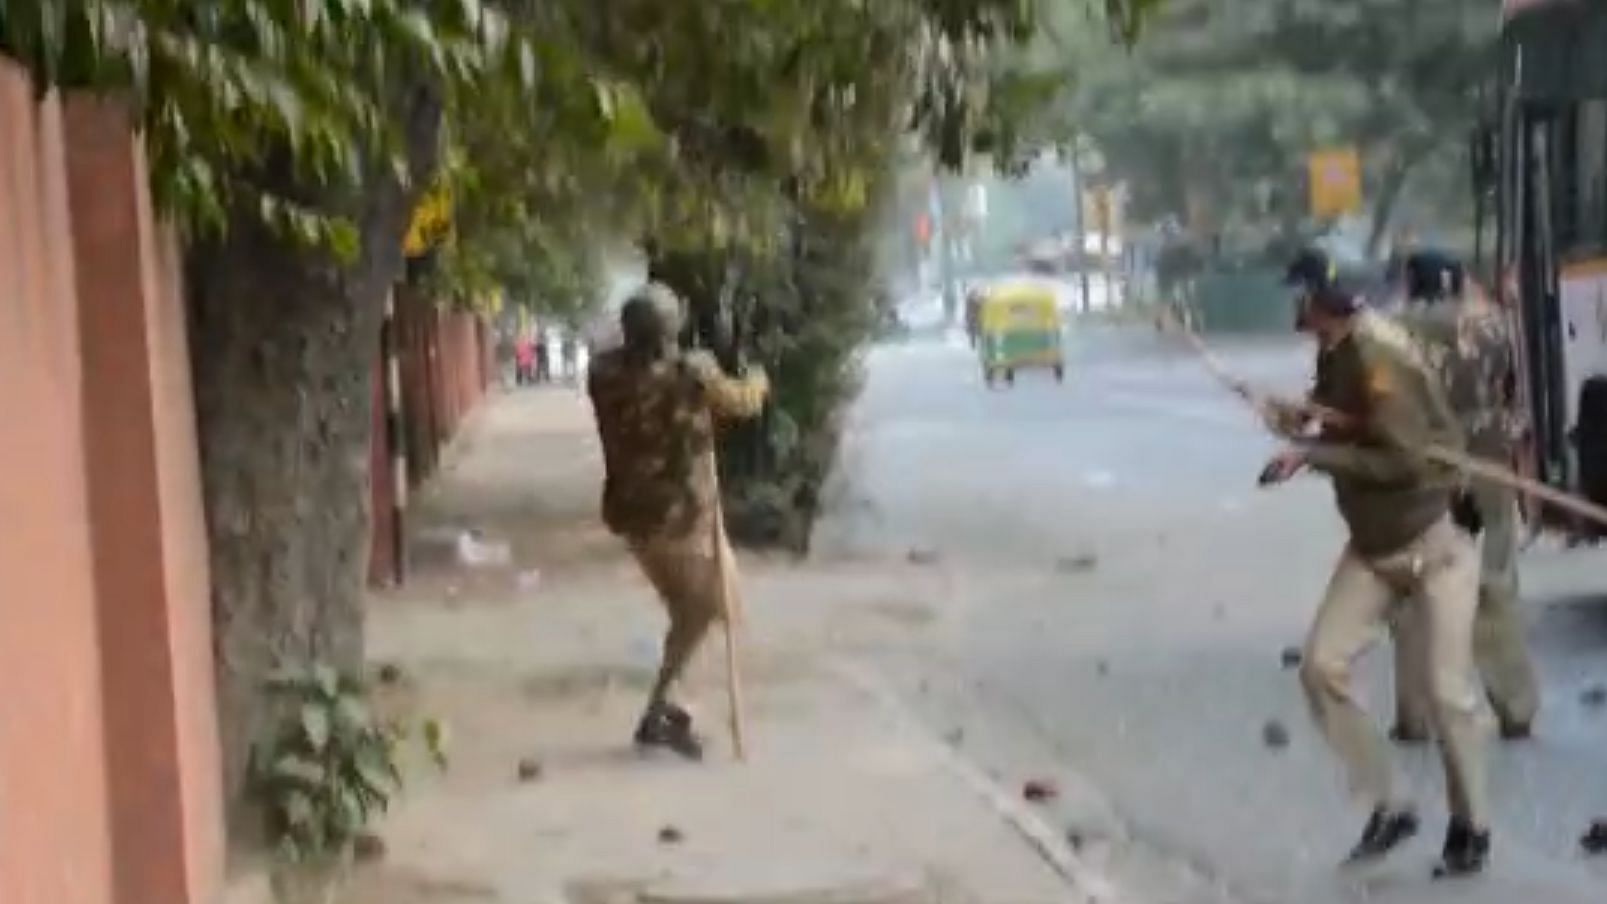 Screengrab of the video from Mathura Road near New Friends Colony.